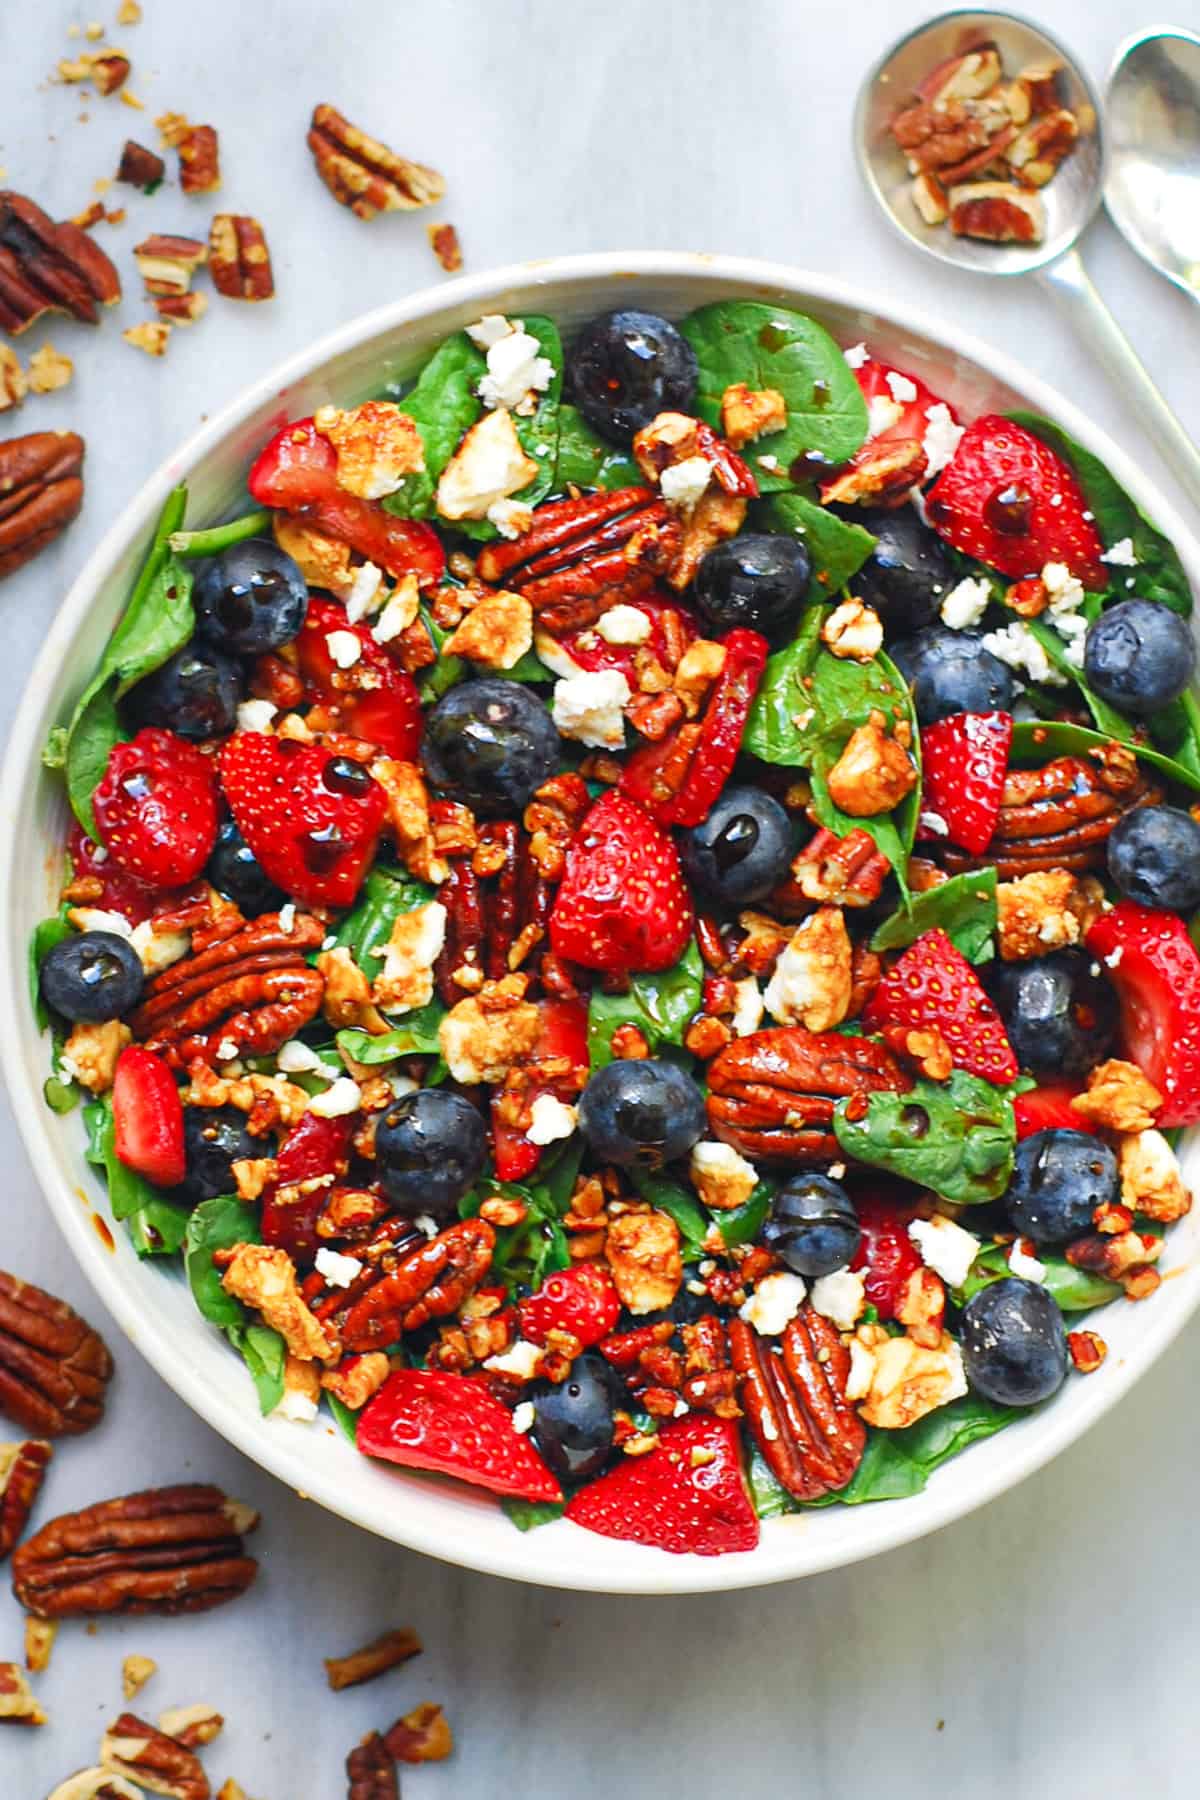 strawberry spinach salad with pecans, blueberries, feta cheese, and balsamic salad dressing